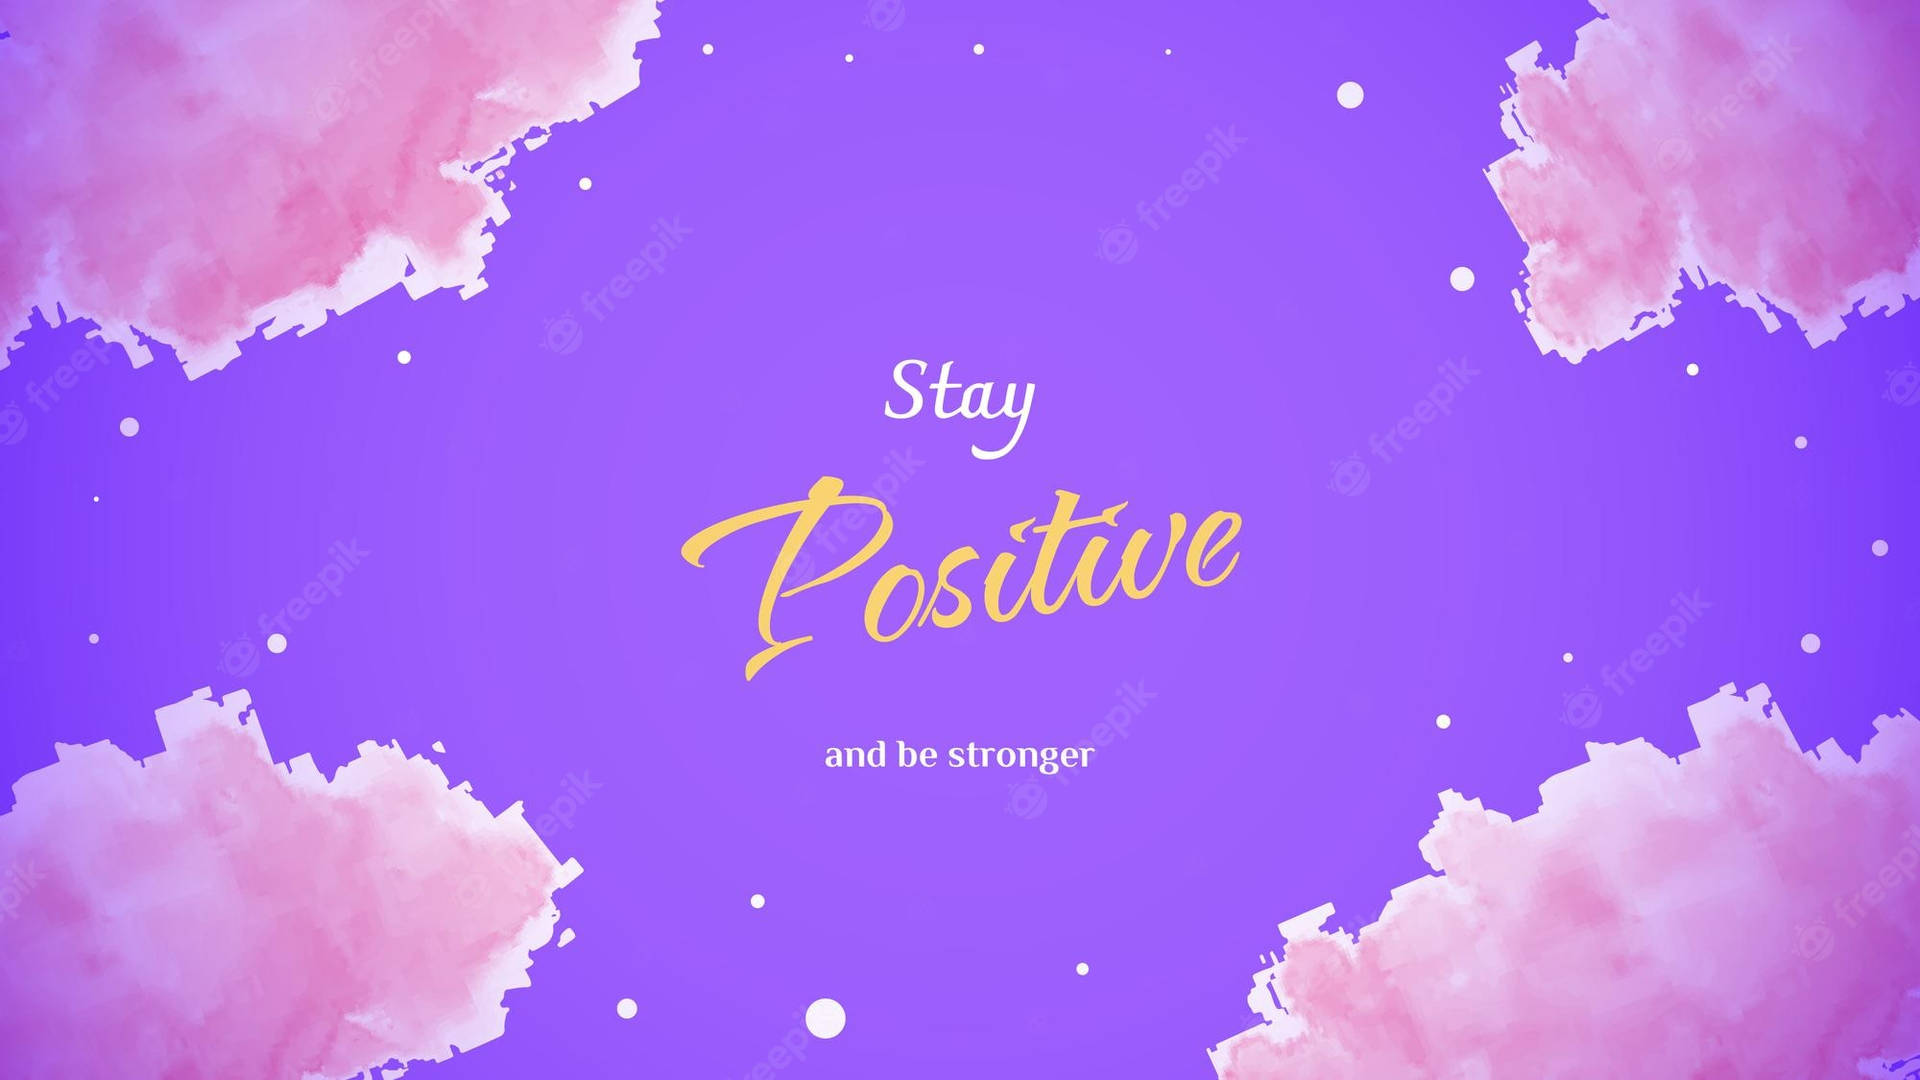 Positive Thinking HD Attitude Wallpapers | HD Wallpapers | ID #62605